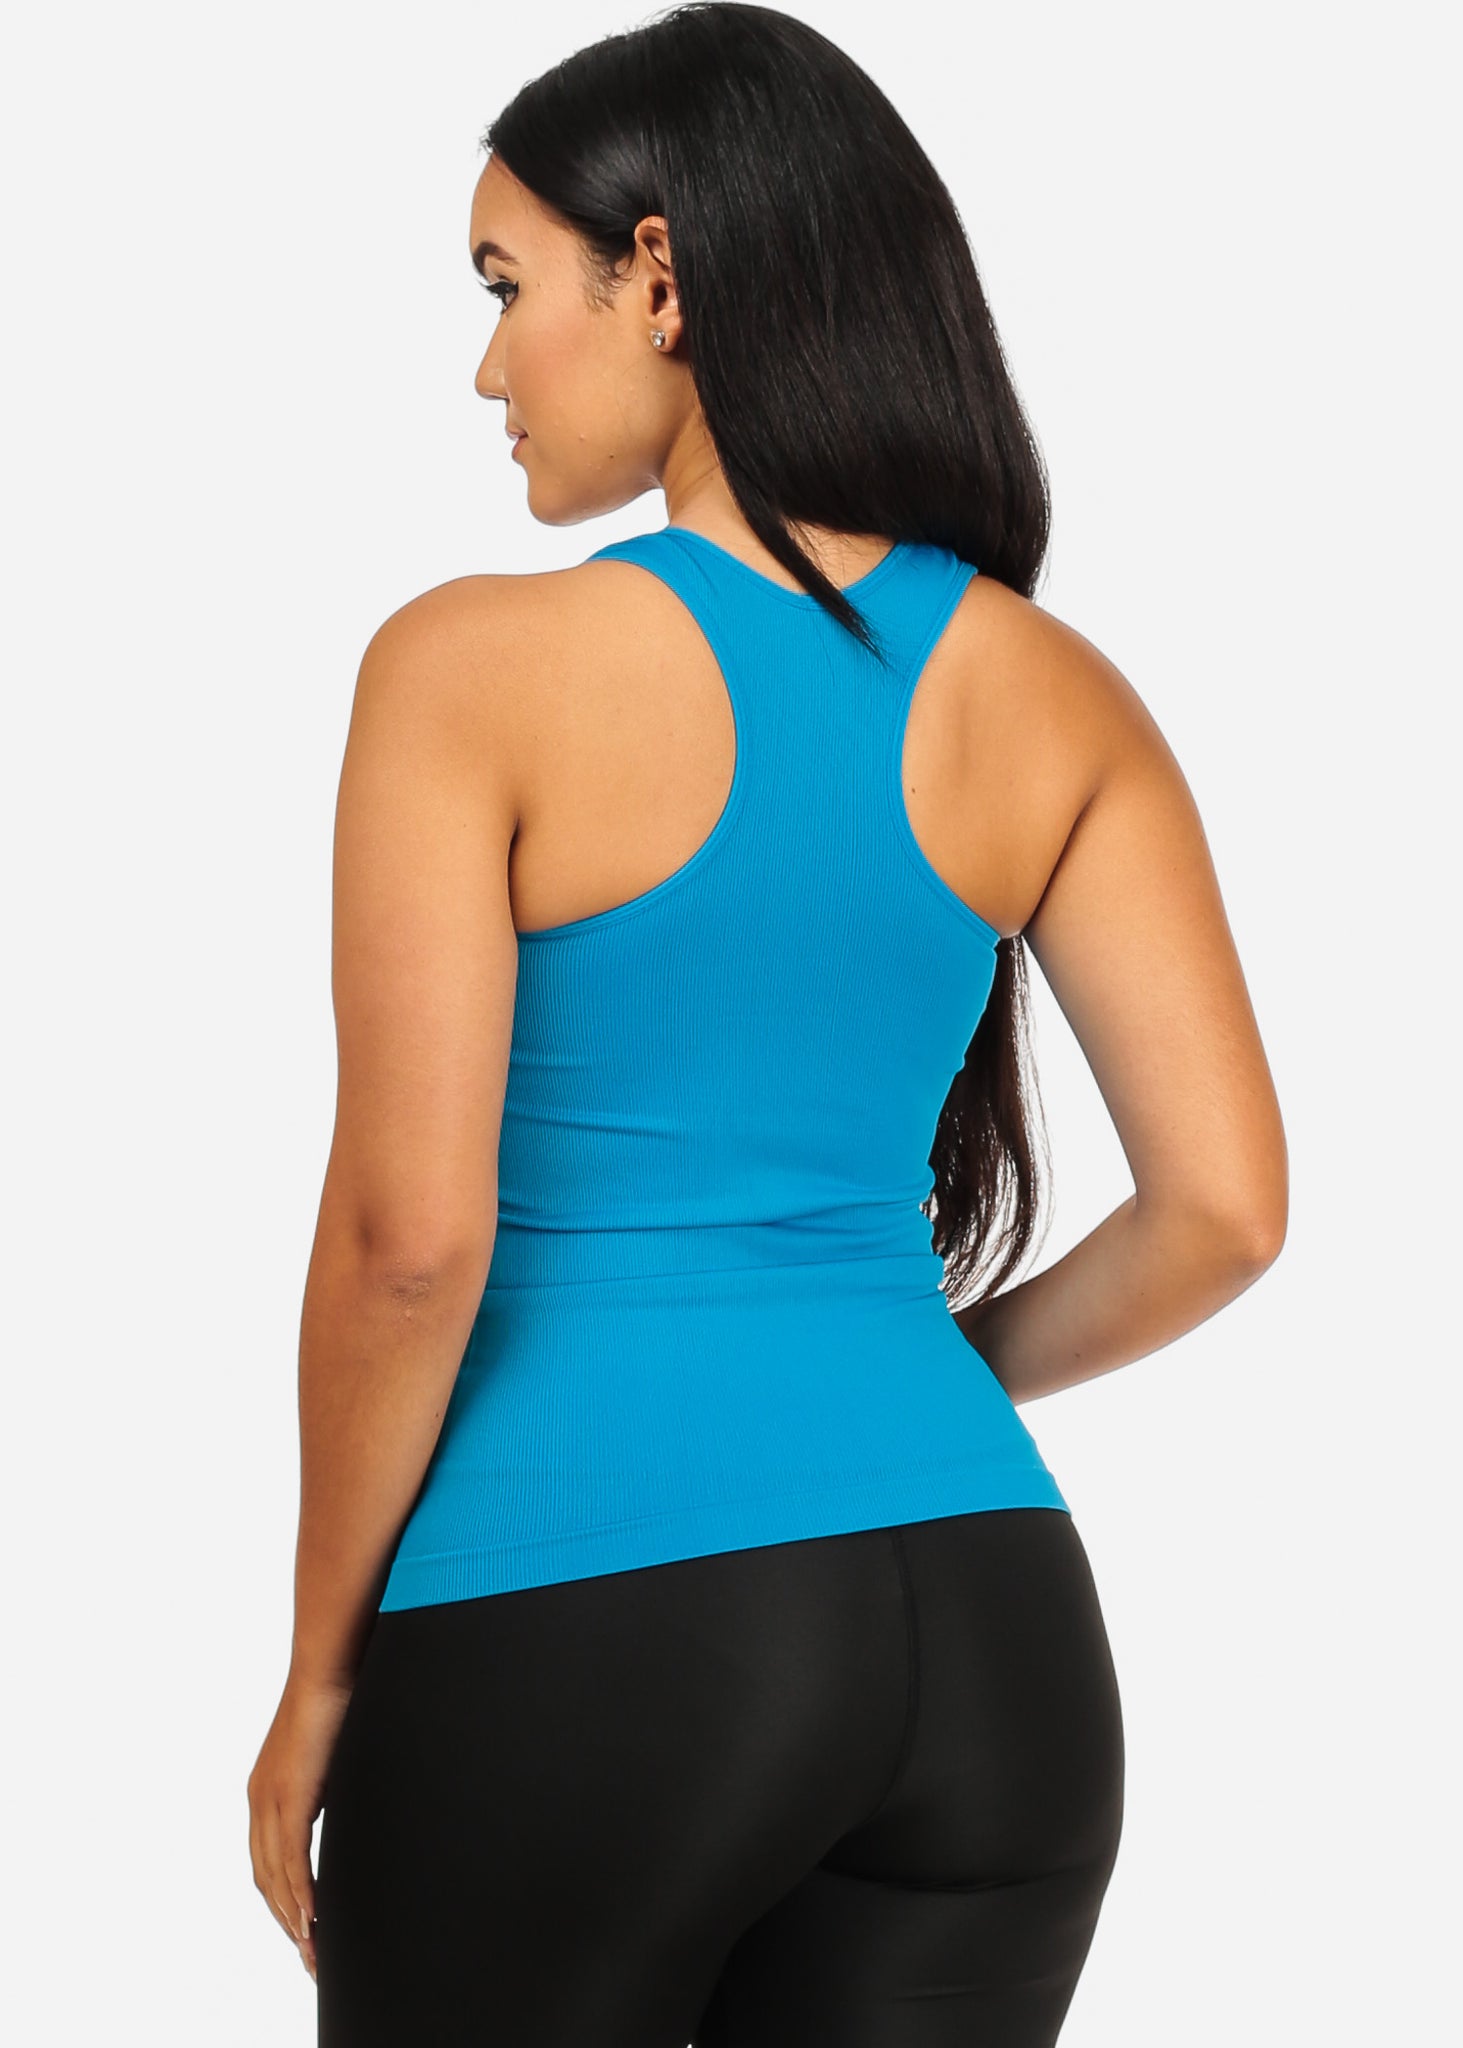 Stretchy Spandex Women's Blue Color Tank Top Tank Top CC-0531 – One Size  Fits